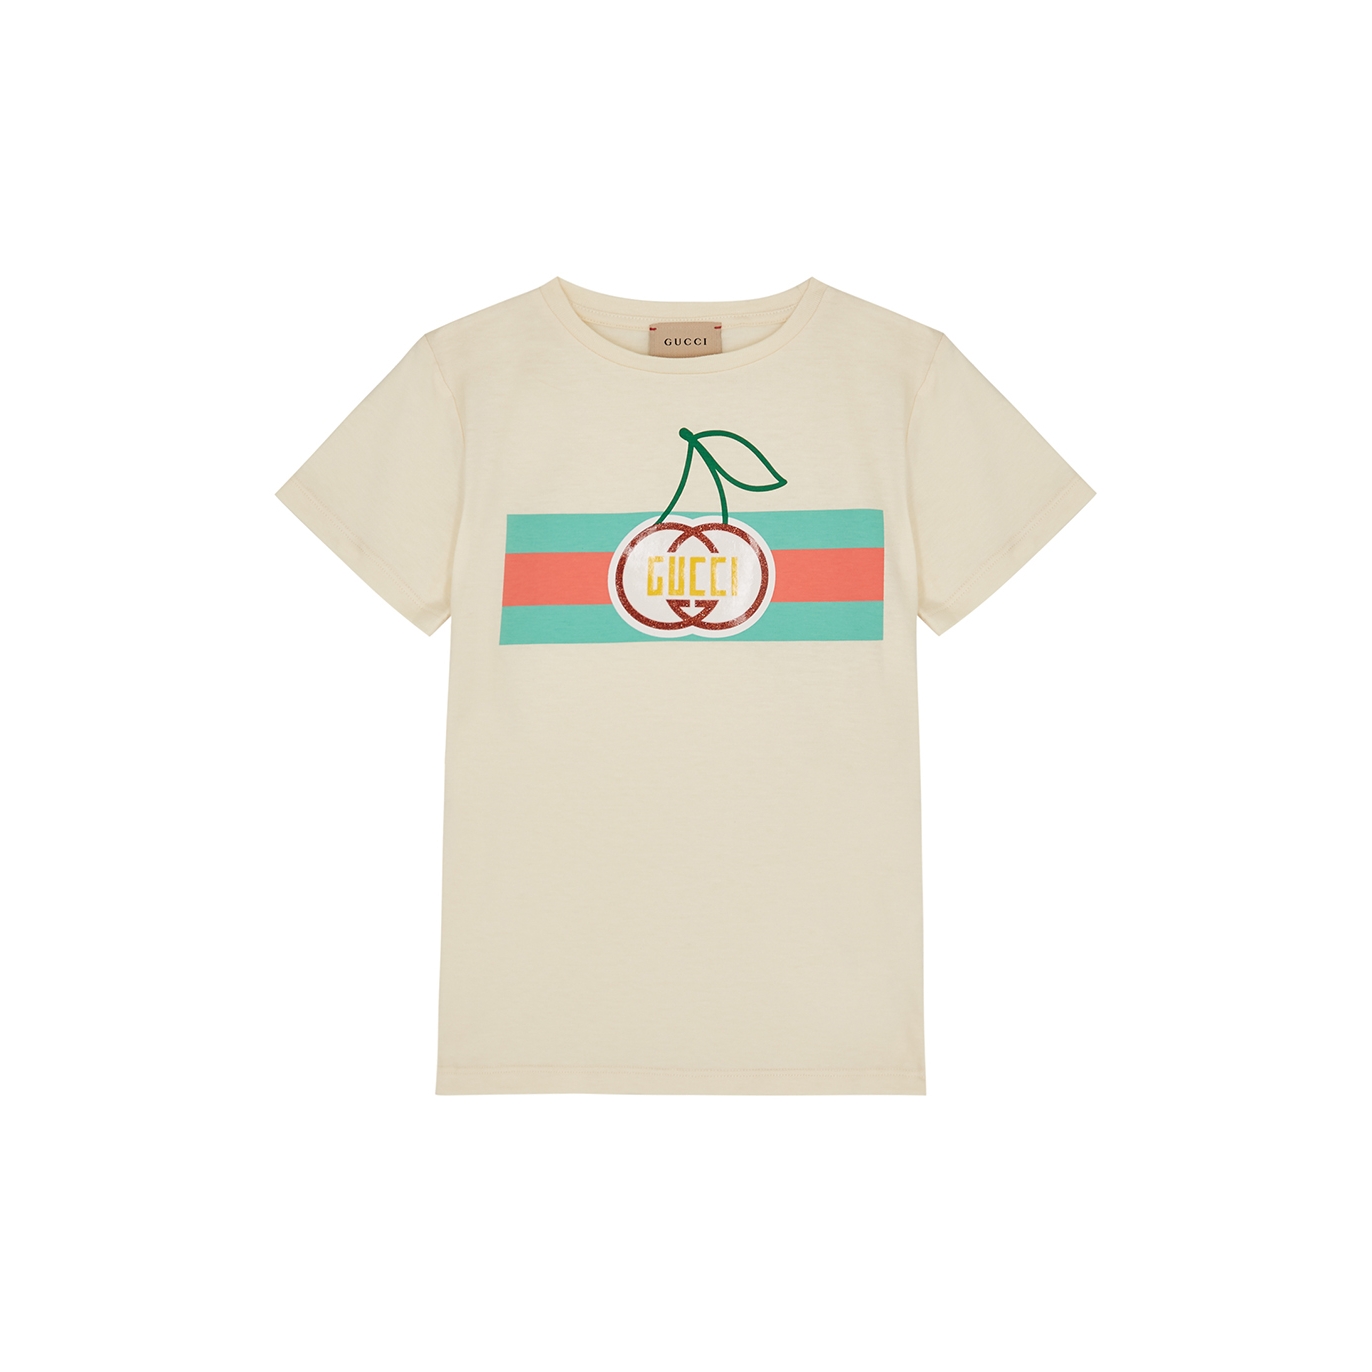 Gucci Kids Yellow Printed Cotton T-shirt - Multicoloured - 10 Years